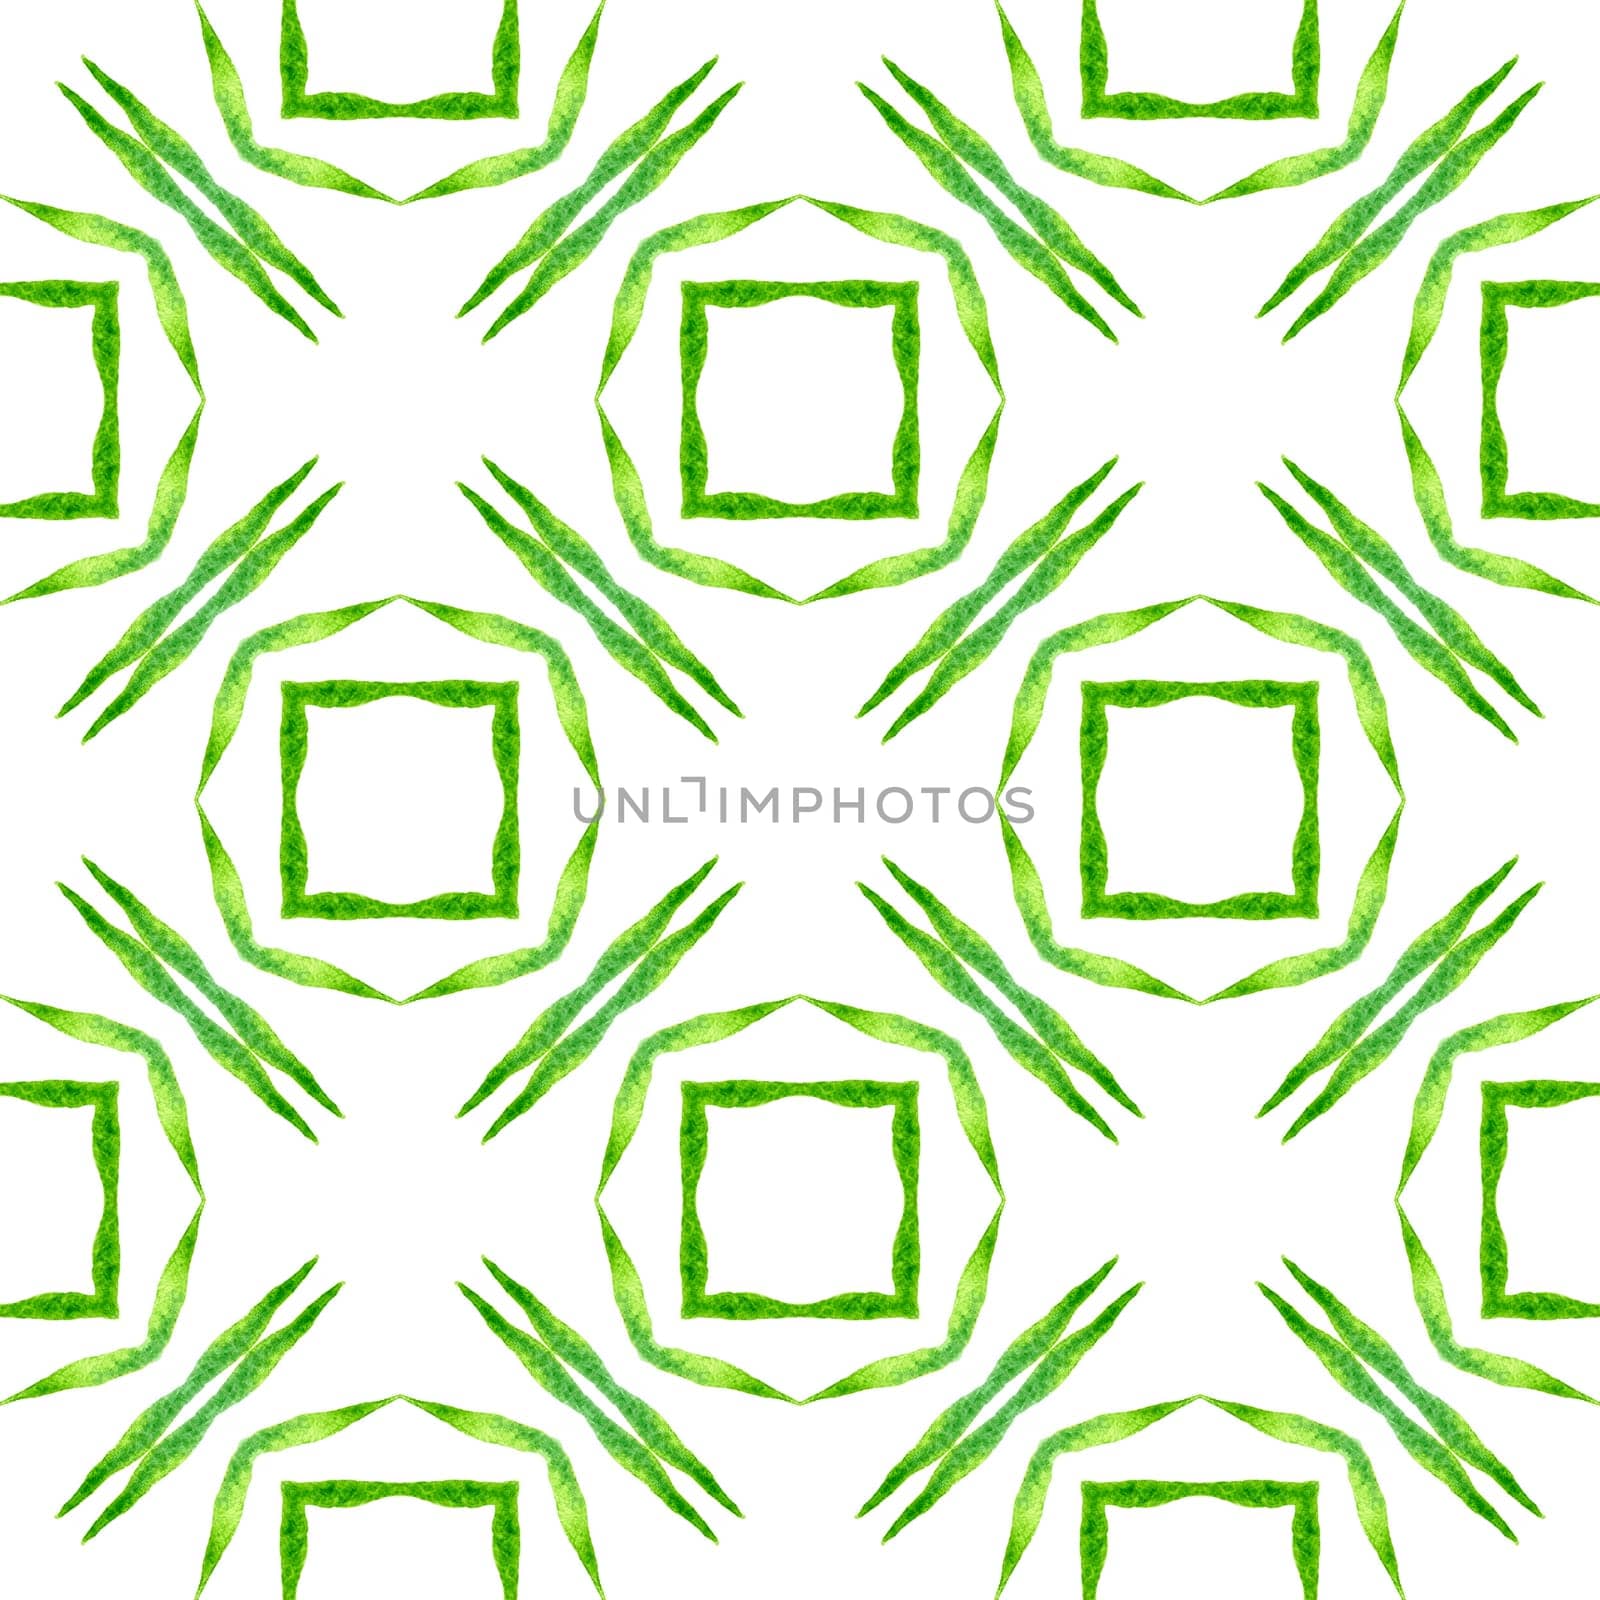 Tropical seamless pattern. Green shapely boho chic summer design. Hand drawn tropical seamless border. Textile ready uncommon print, swimwear fabric, wallpaper, wrapping.